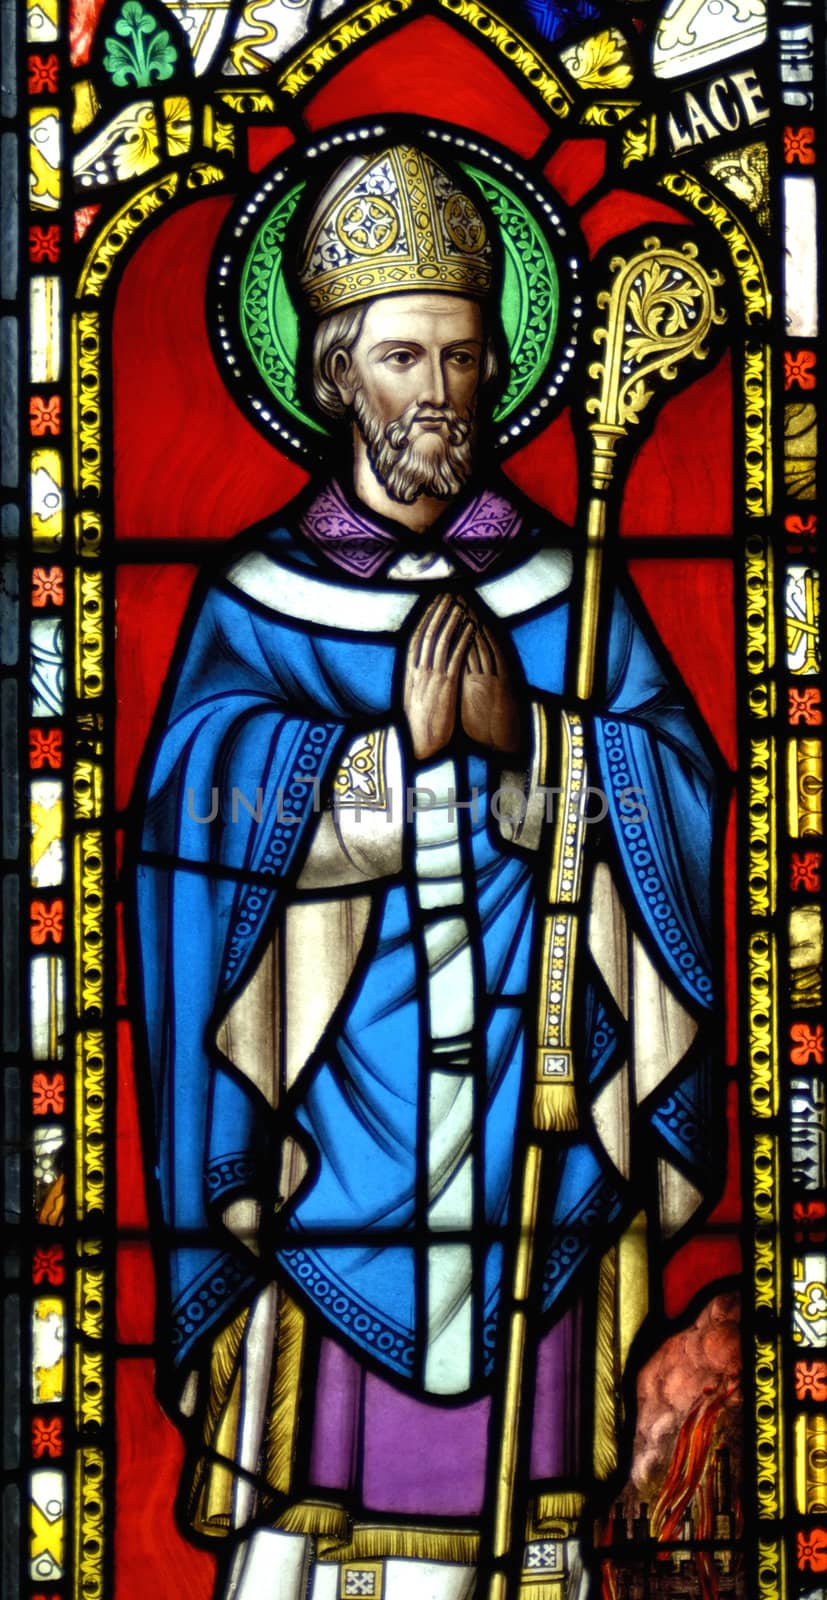 A stained glass window in the chapel on the Farne Islands, UK, depicting Saint Cuthbert as Bishop of Lindisfarne